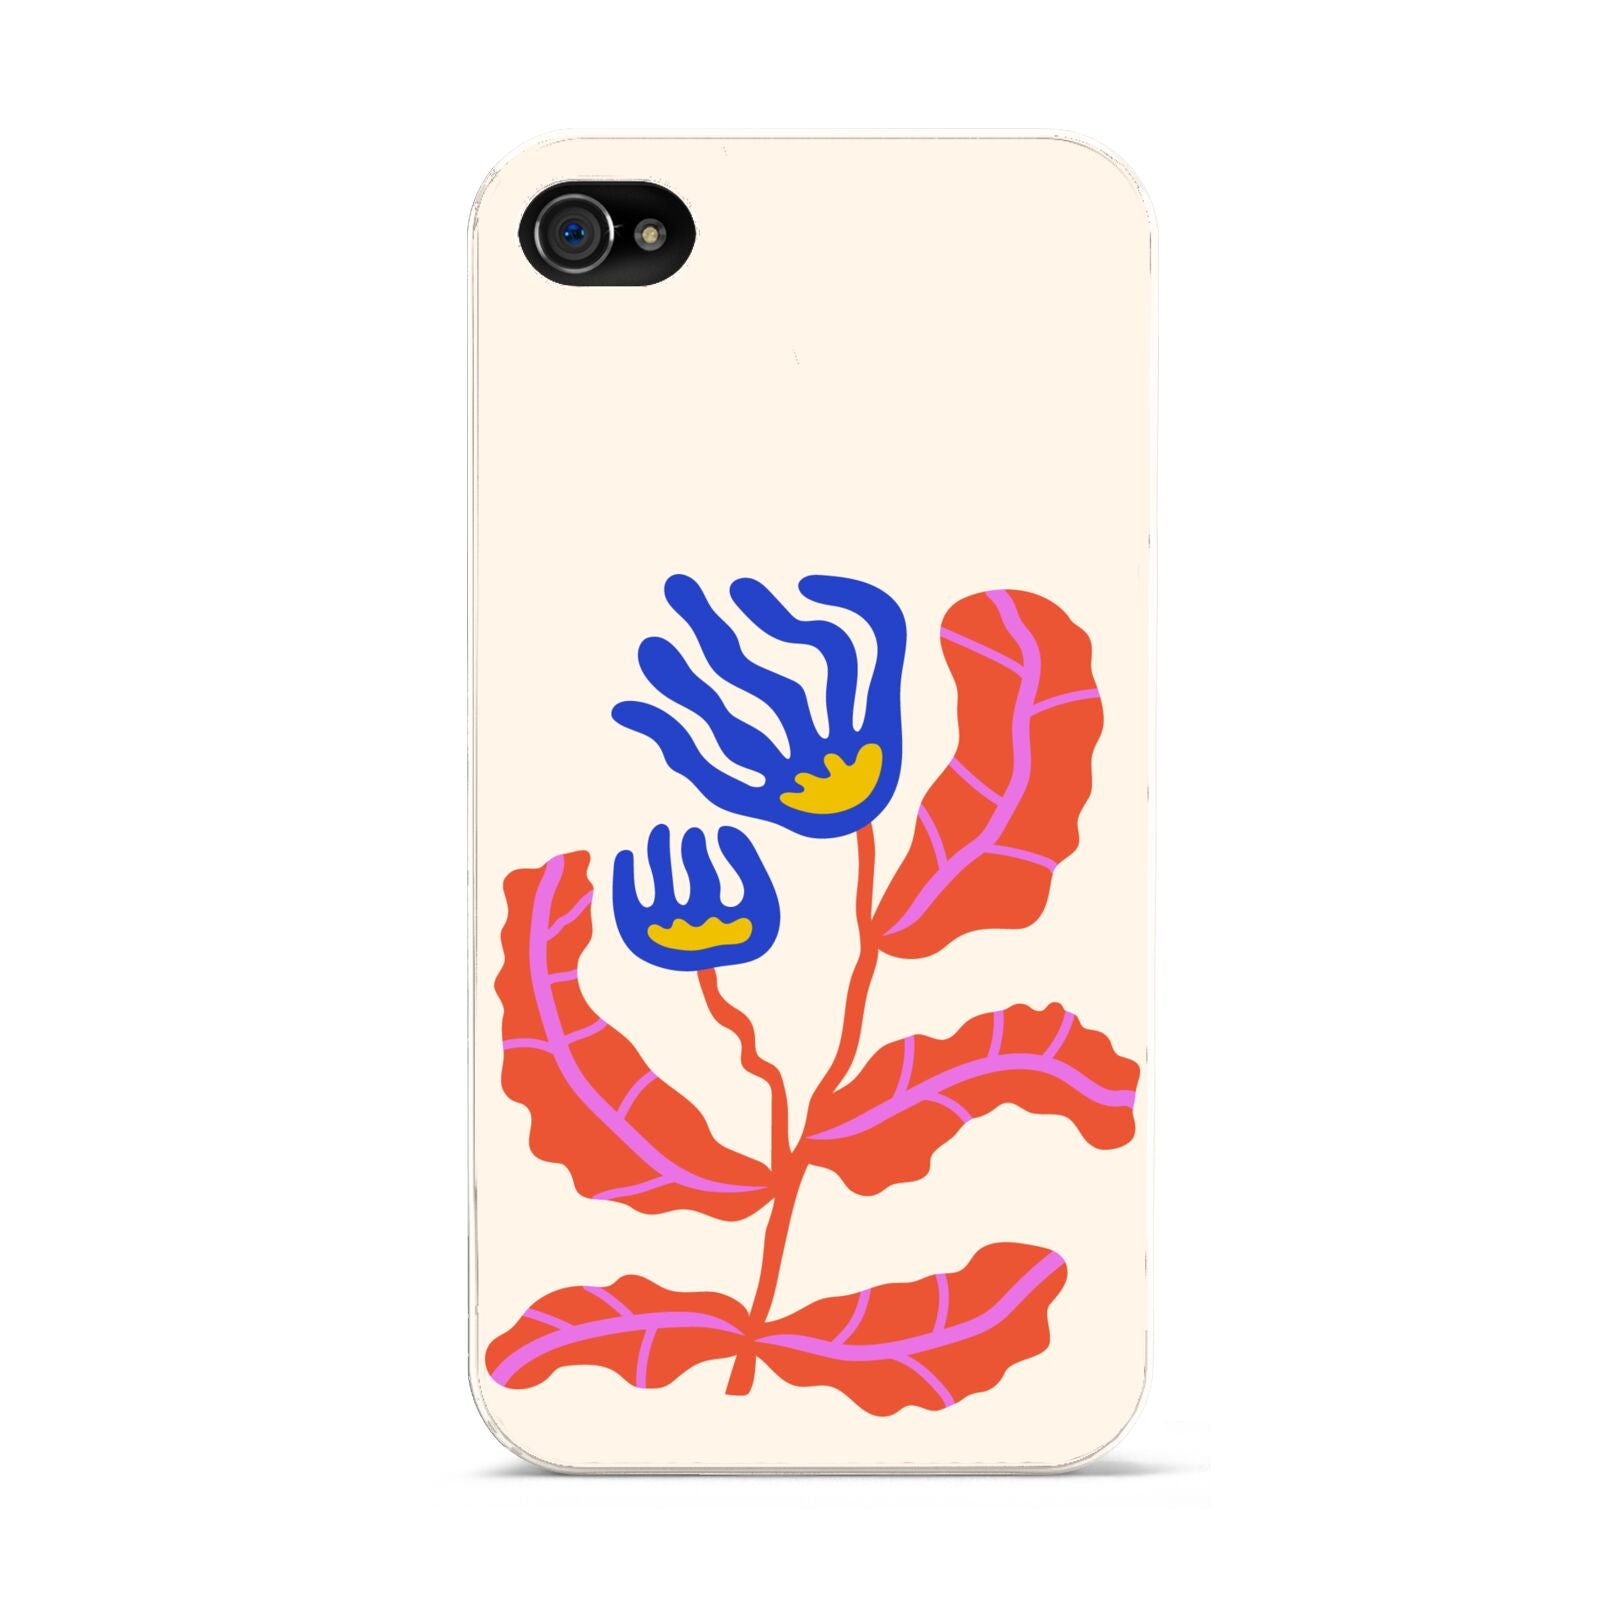 Contemporary Floral Apple iPhone 4s Case